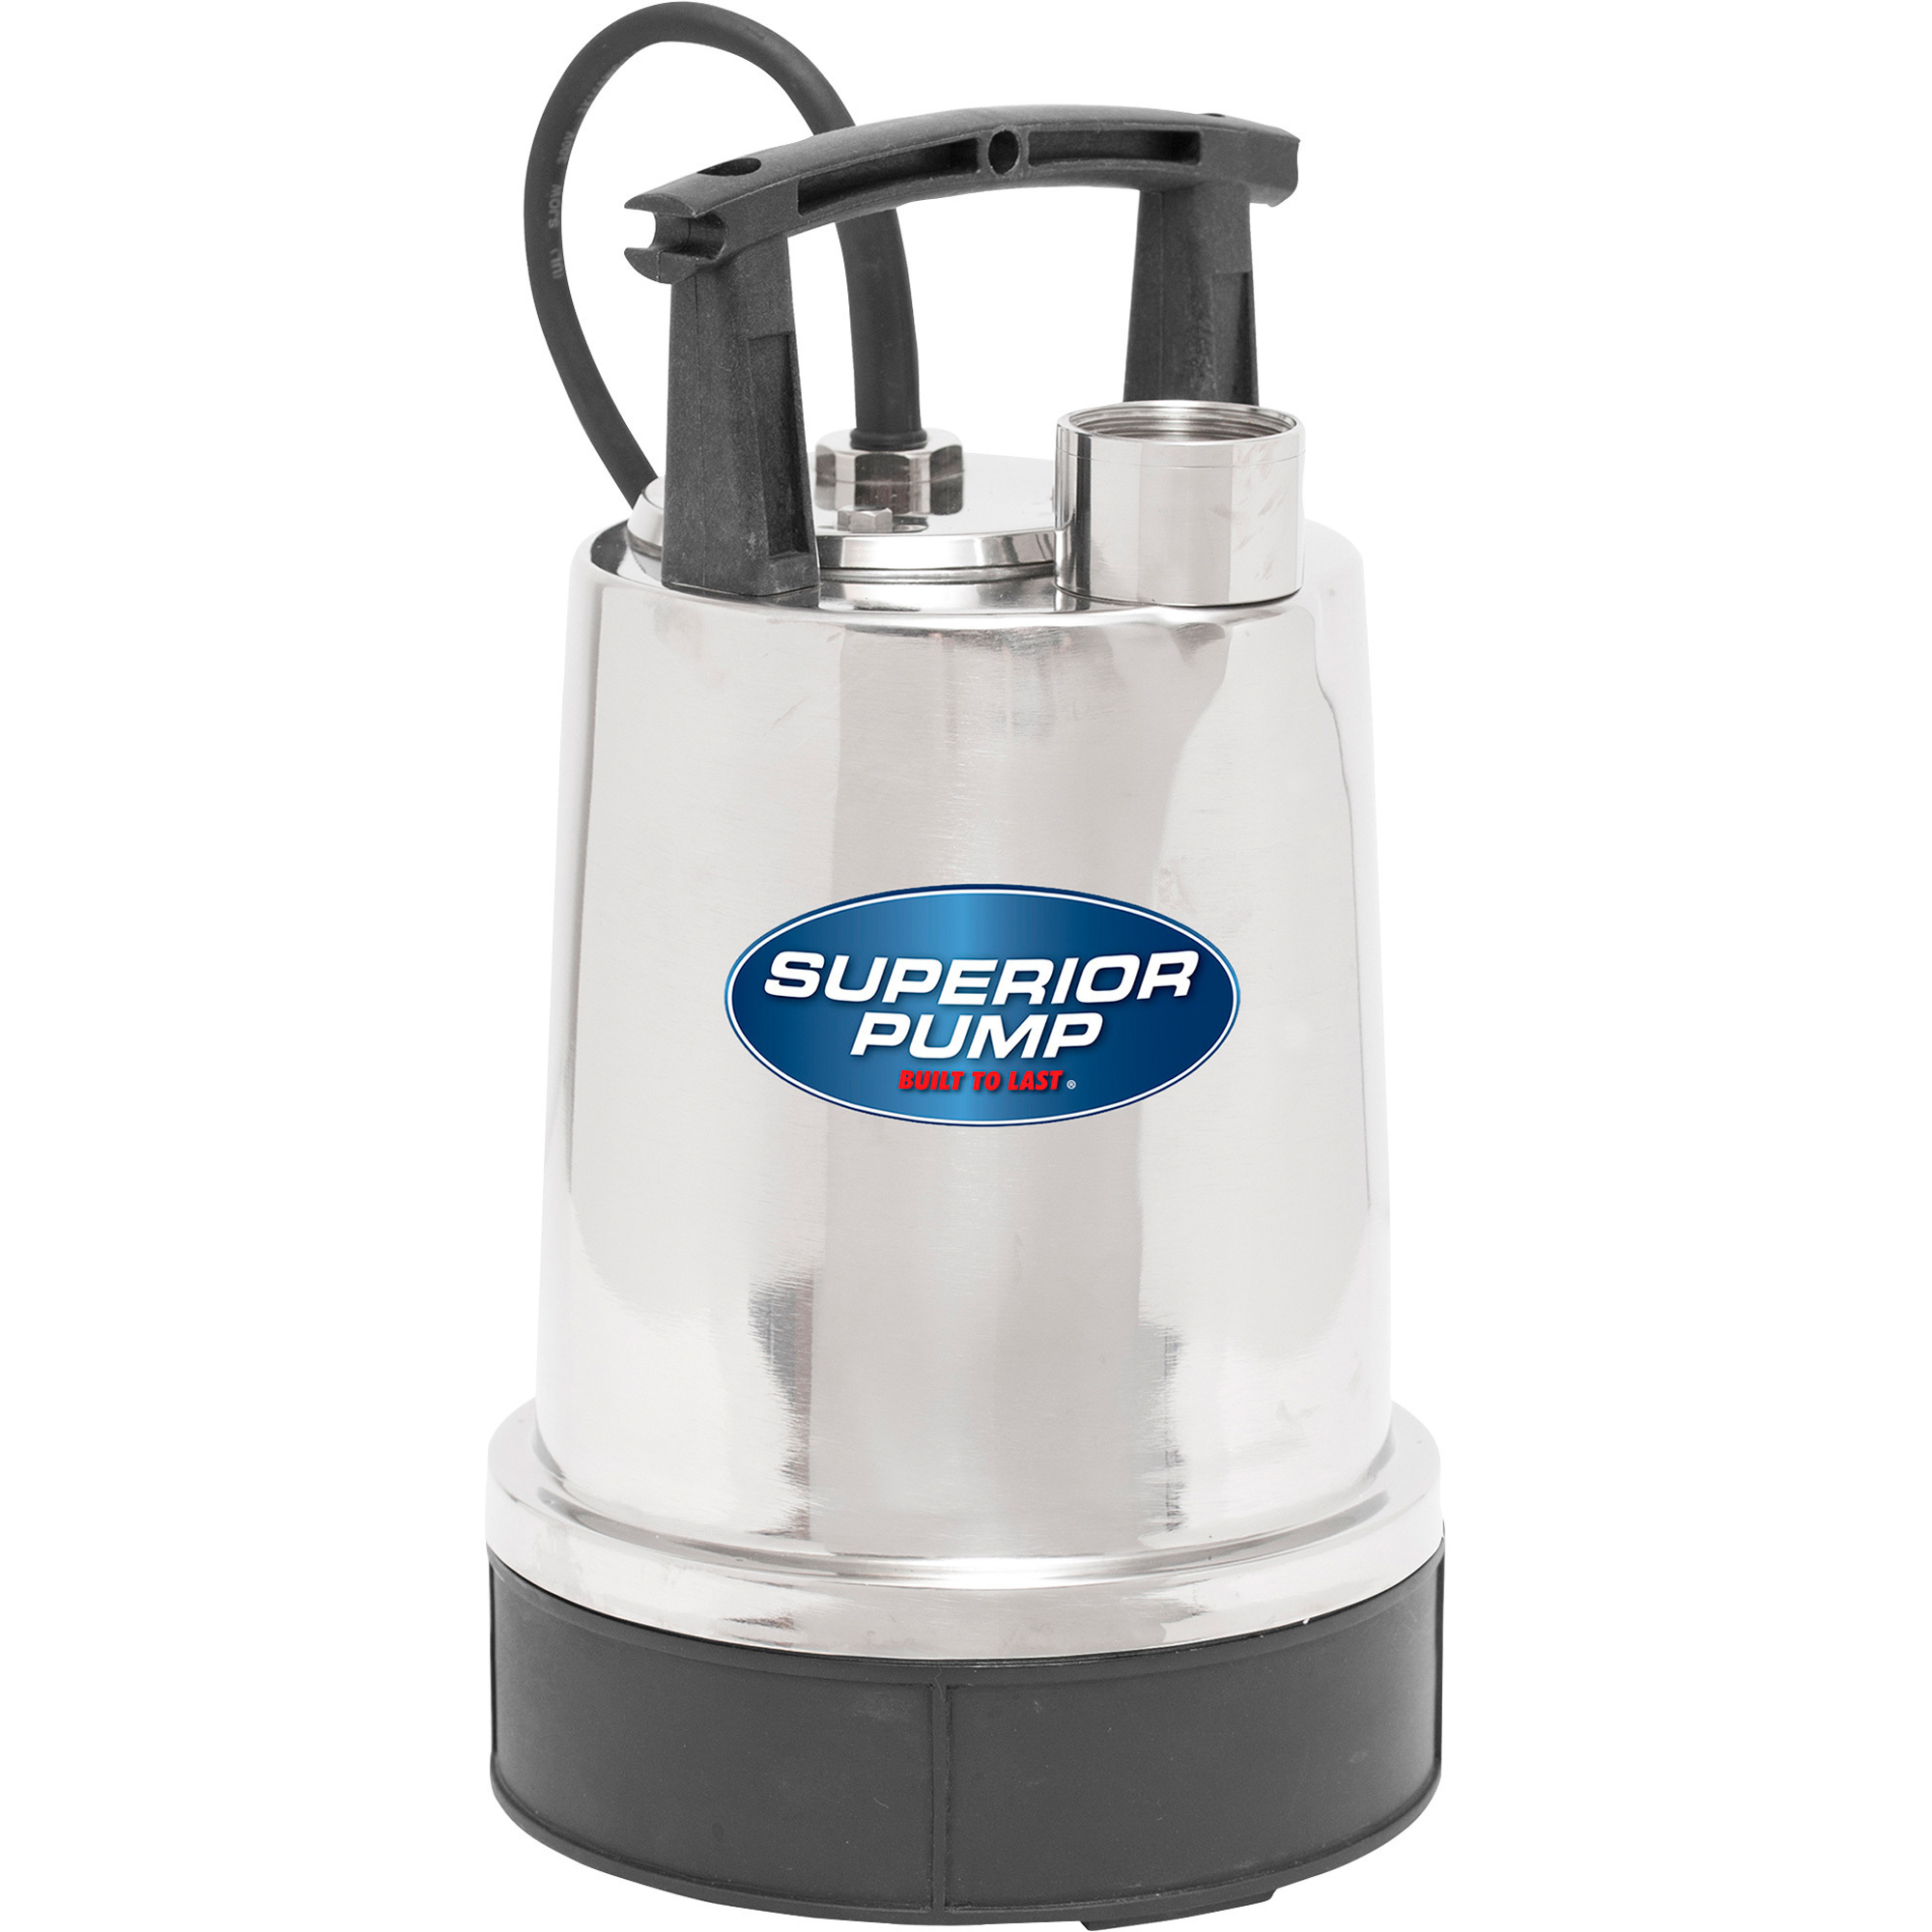 Superior Pump Stainless Steel Submersible Utility Pump â 3300 GPH, 1/3 HP, Model 91392